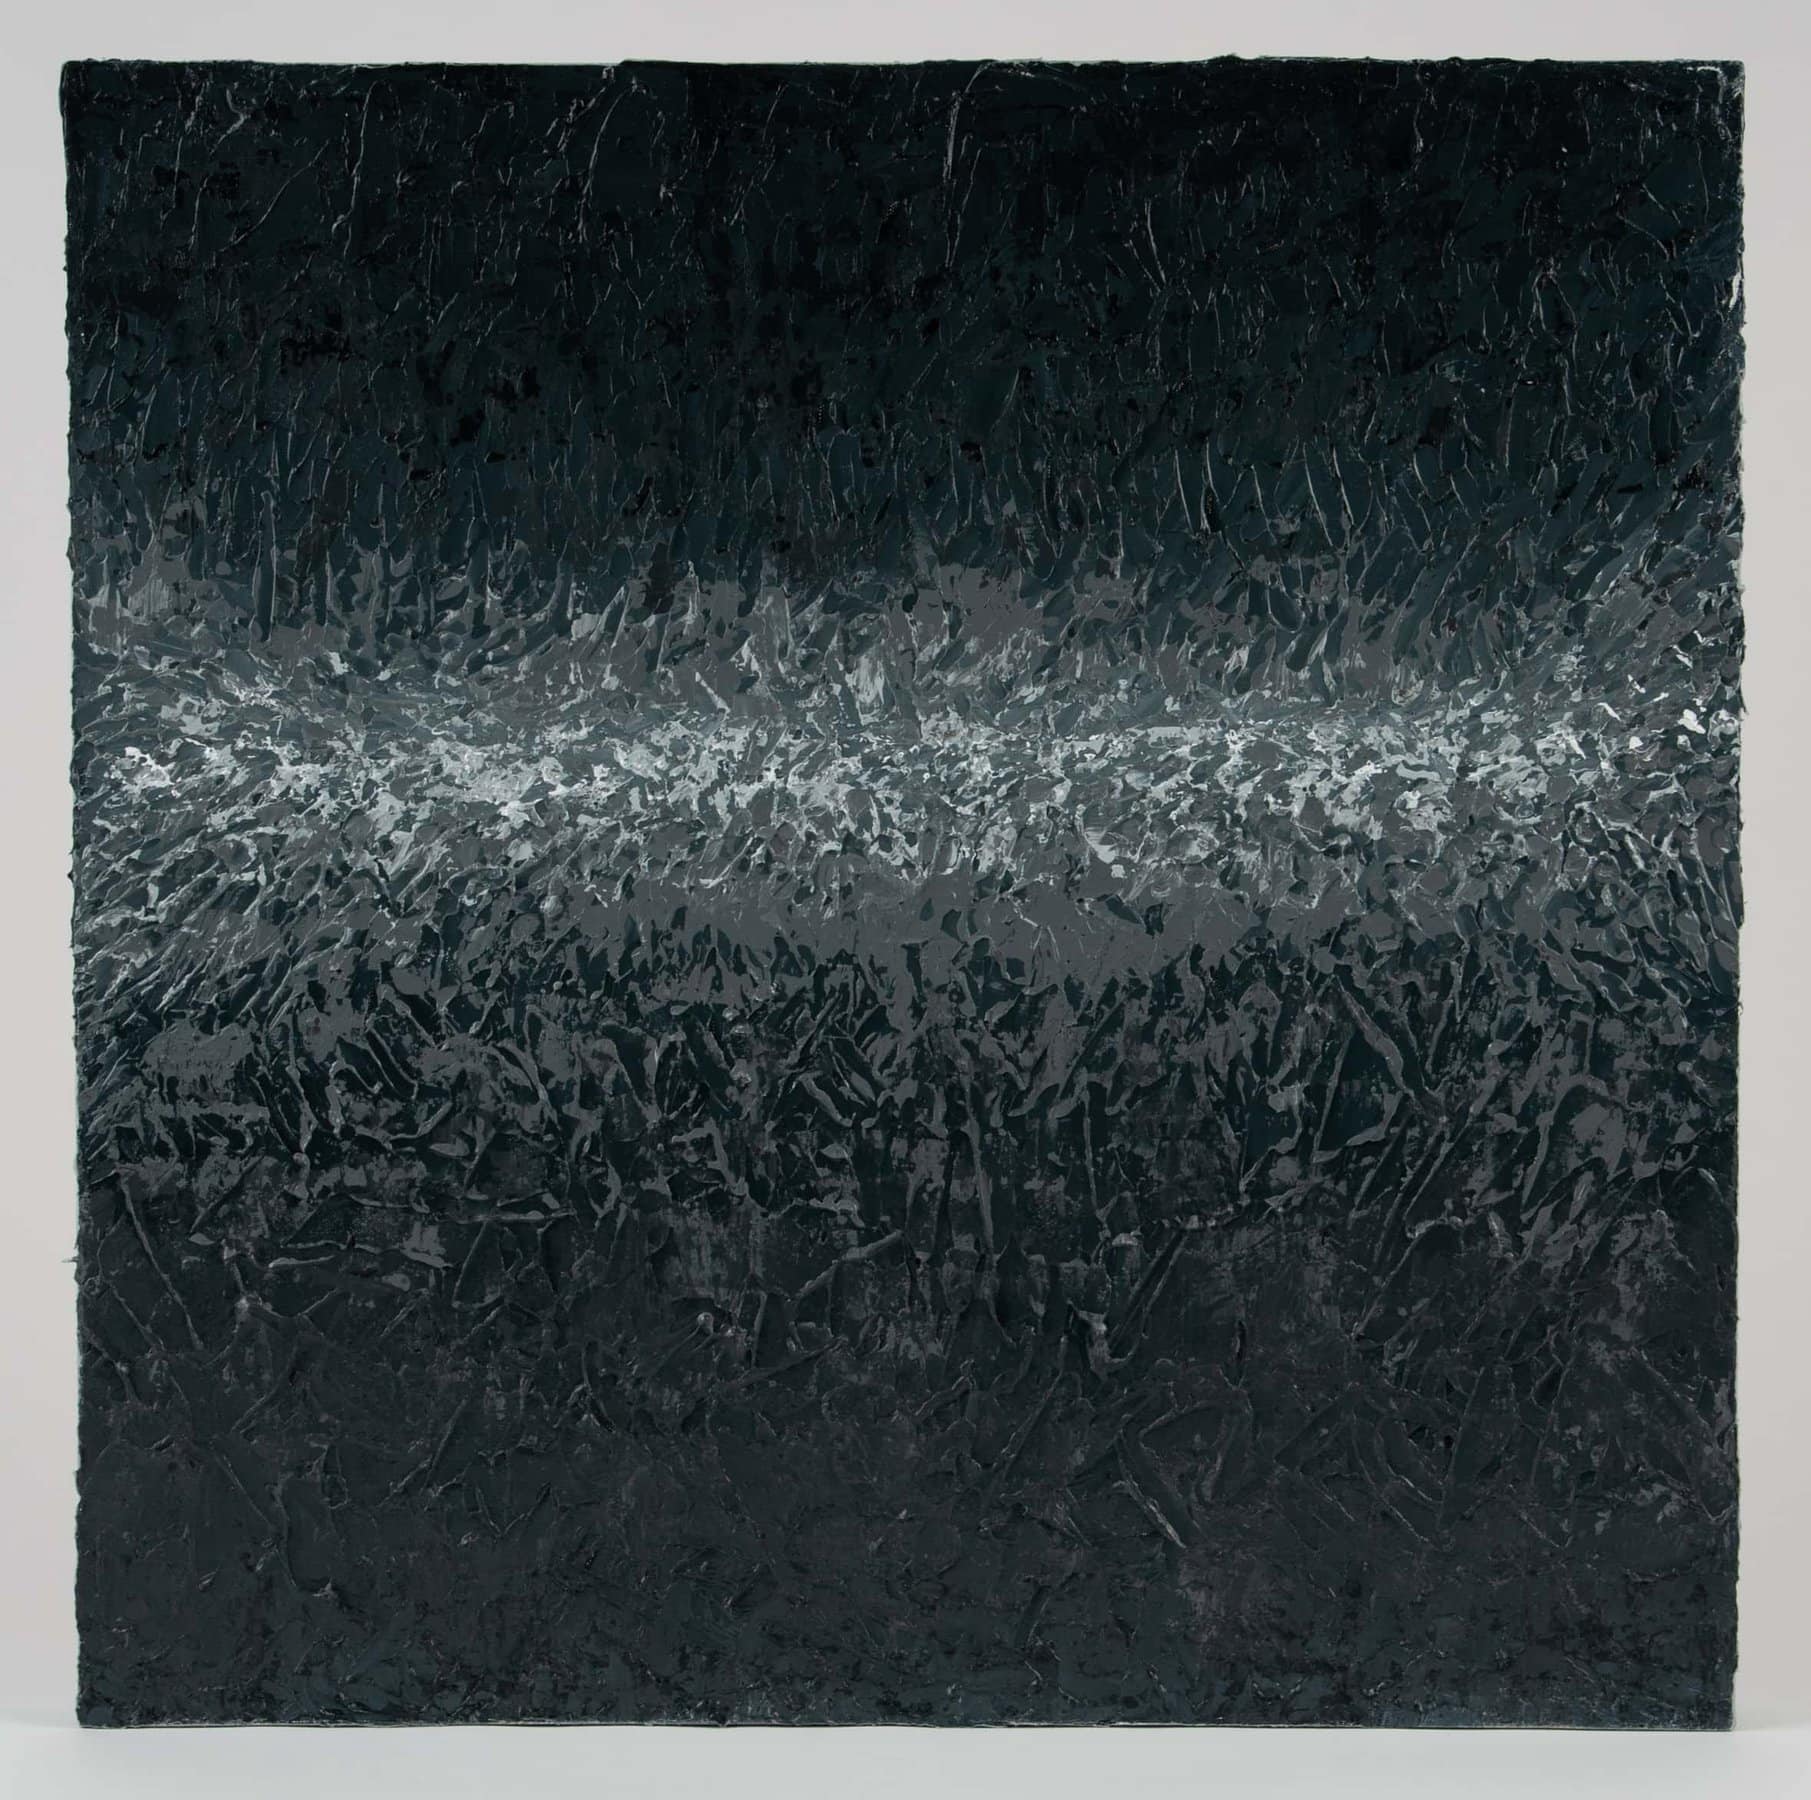 This painting has an impasto texture. The color begins with a black and transitions to grey and light grey in the center. The bottom transitions from dark grey to black.